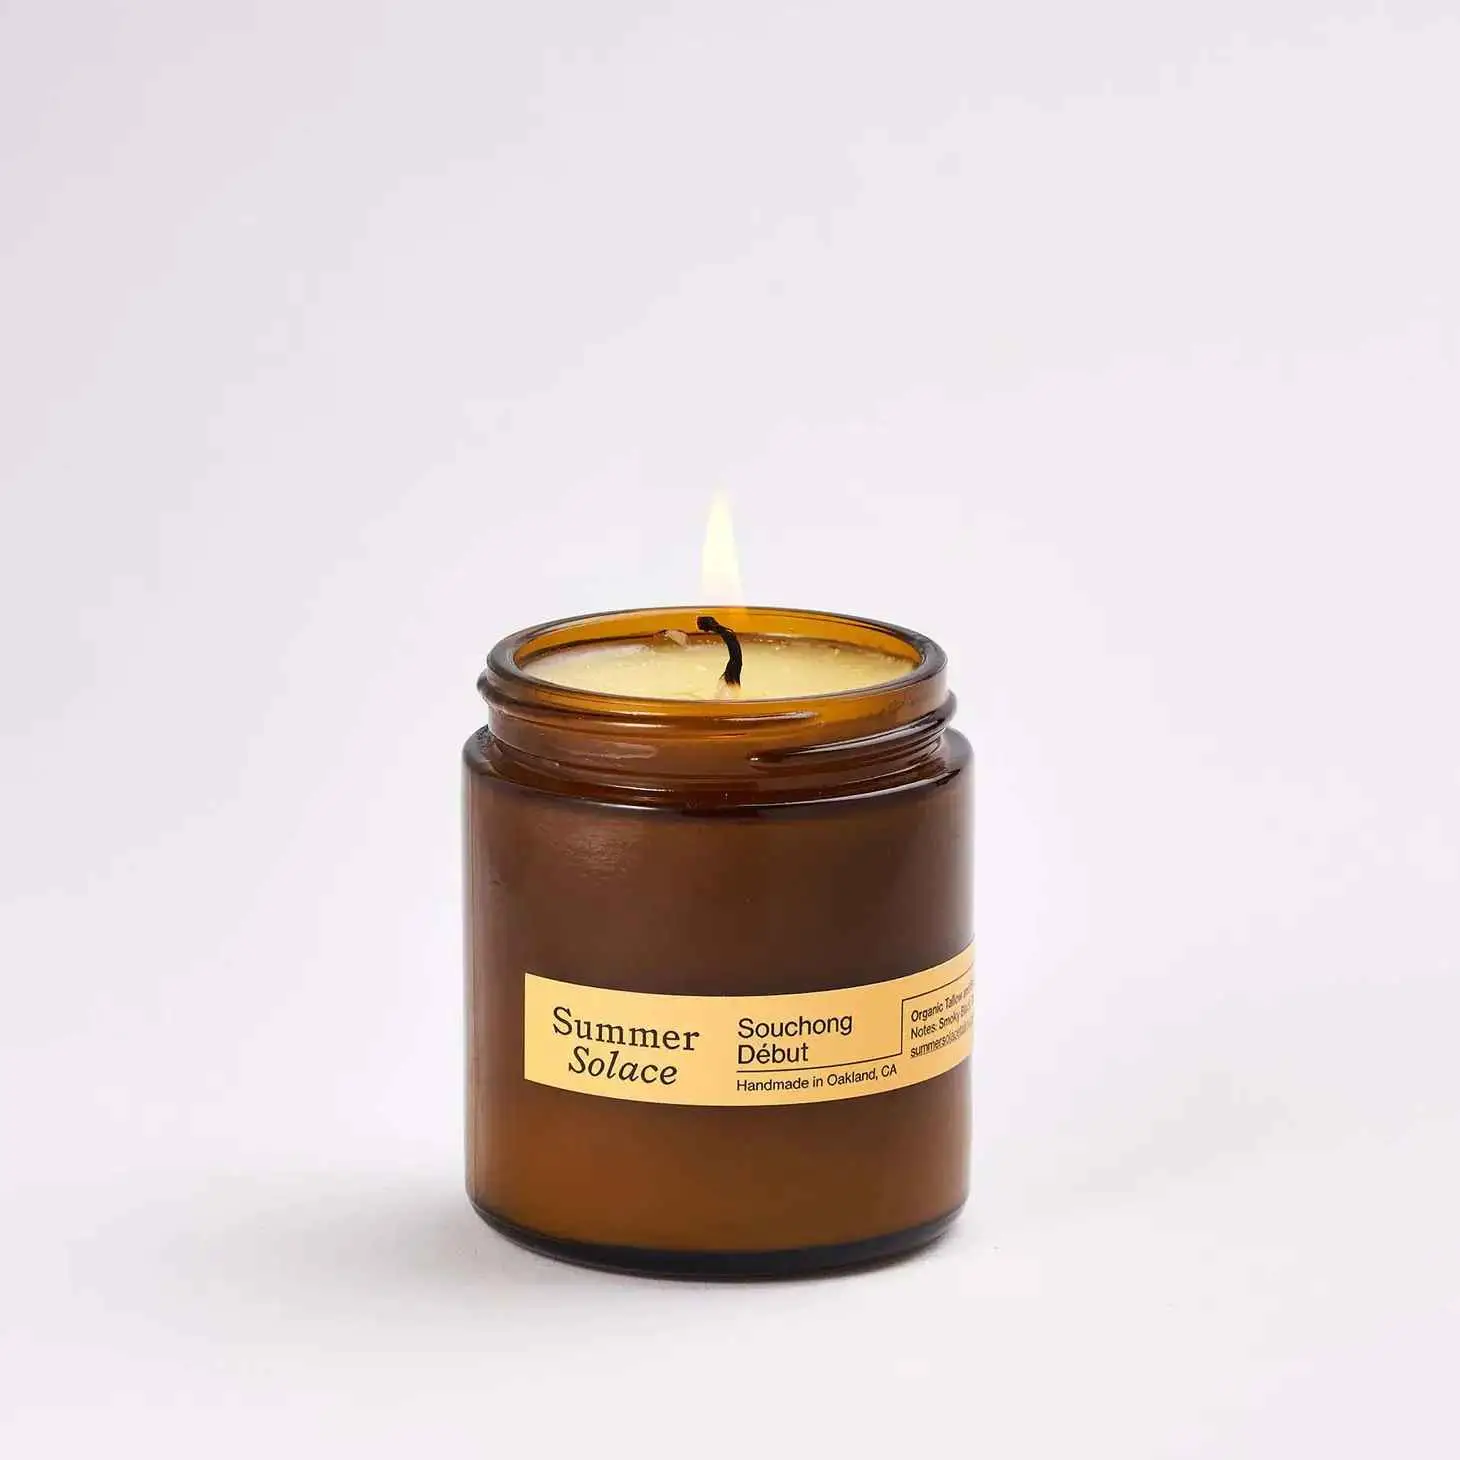 Souchong Debut (Black Tea and Vetiver) Tallow Candle